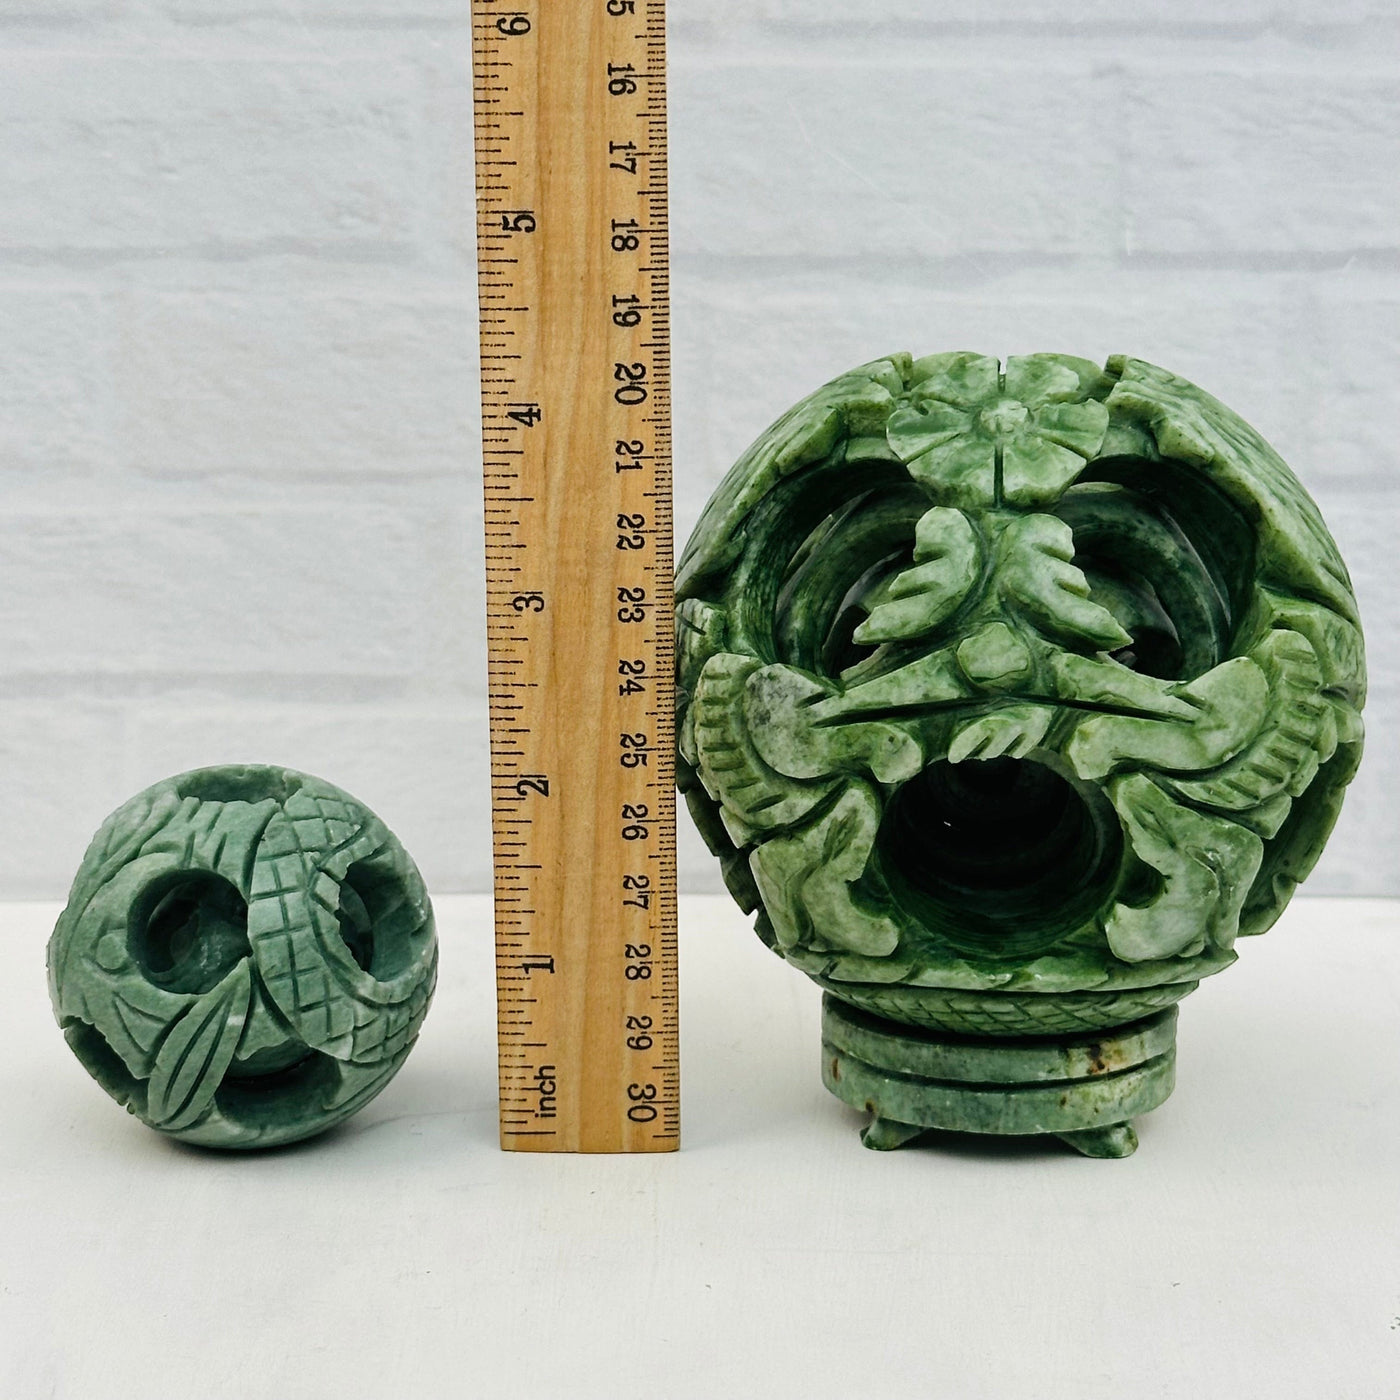 Carved Jade Puzzle Ball - Good Luck Charm - You Select Size next to a ruler for size reference 